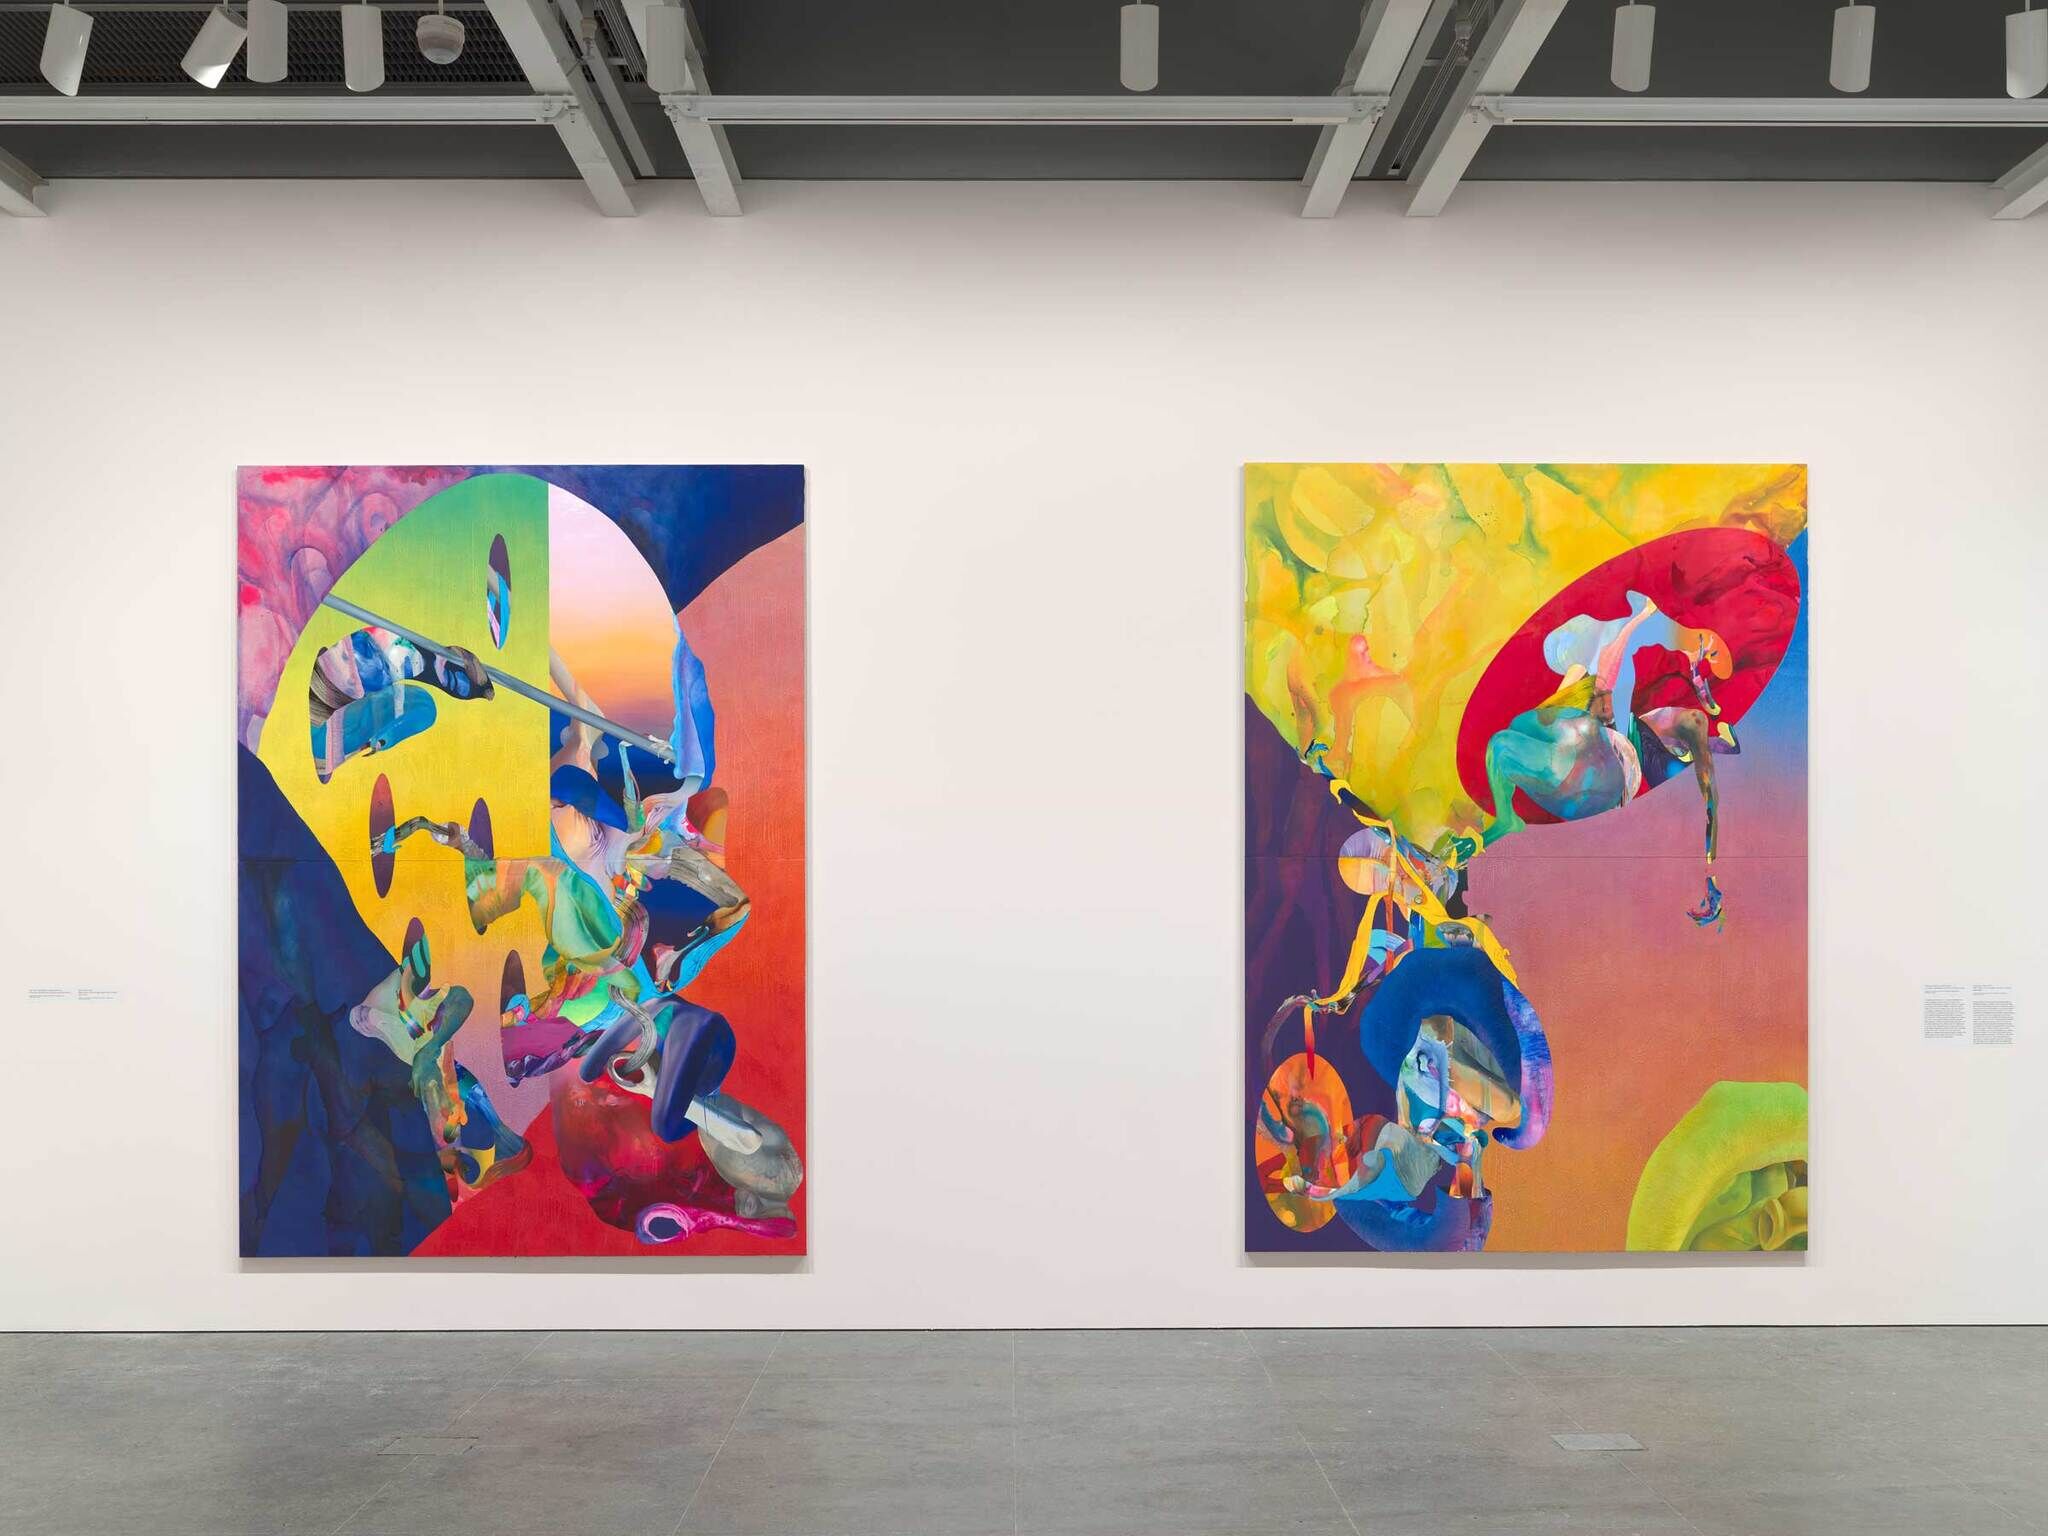 Two paintings placed side by side on a wall. Both are vivid, abstract, and bright with yellows, pinks, blues, greens, and reds.